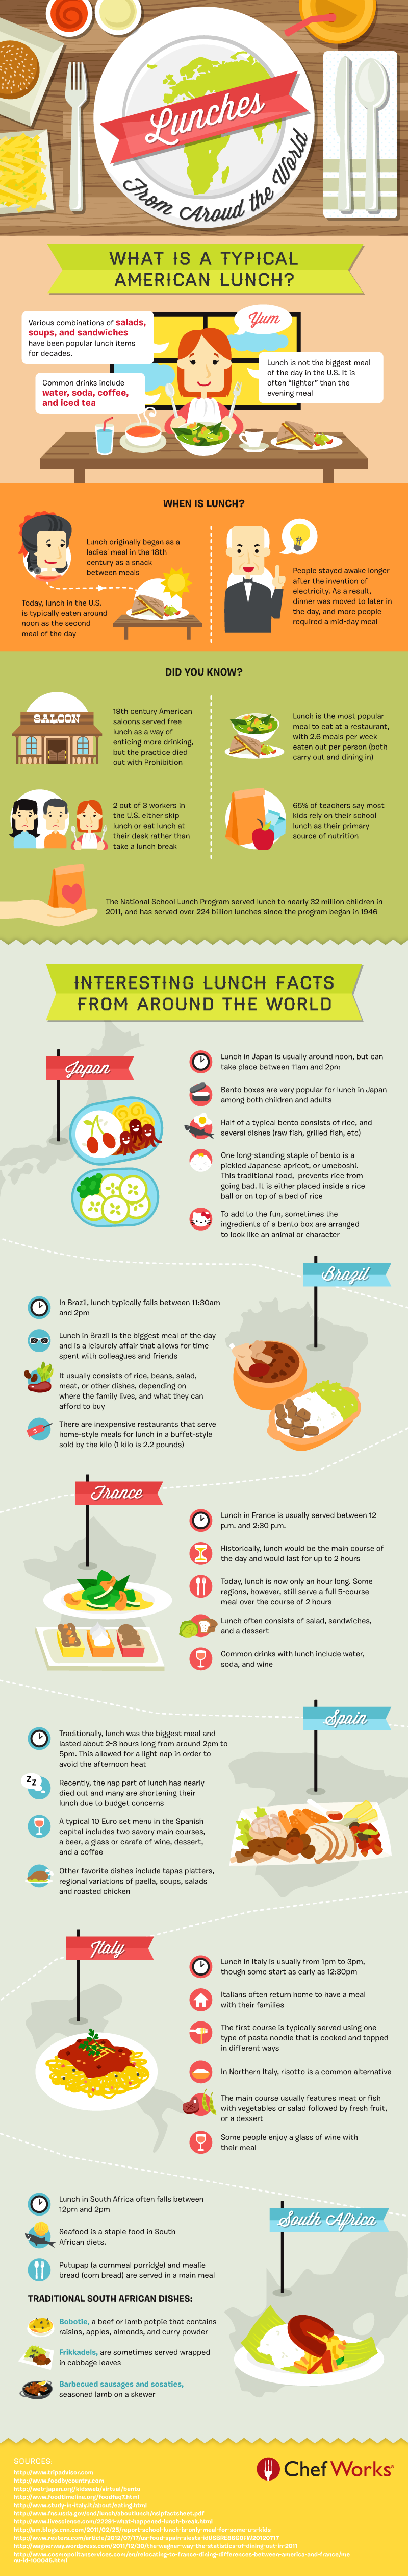 Lunches From Around The World Infographic